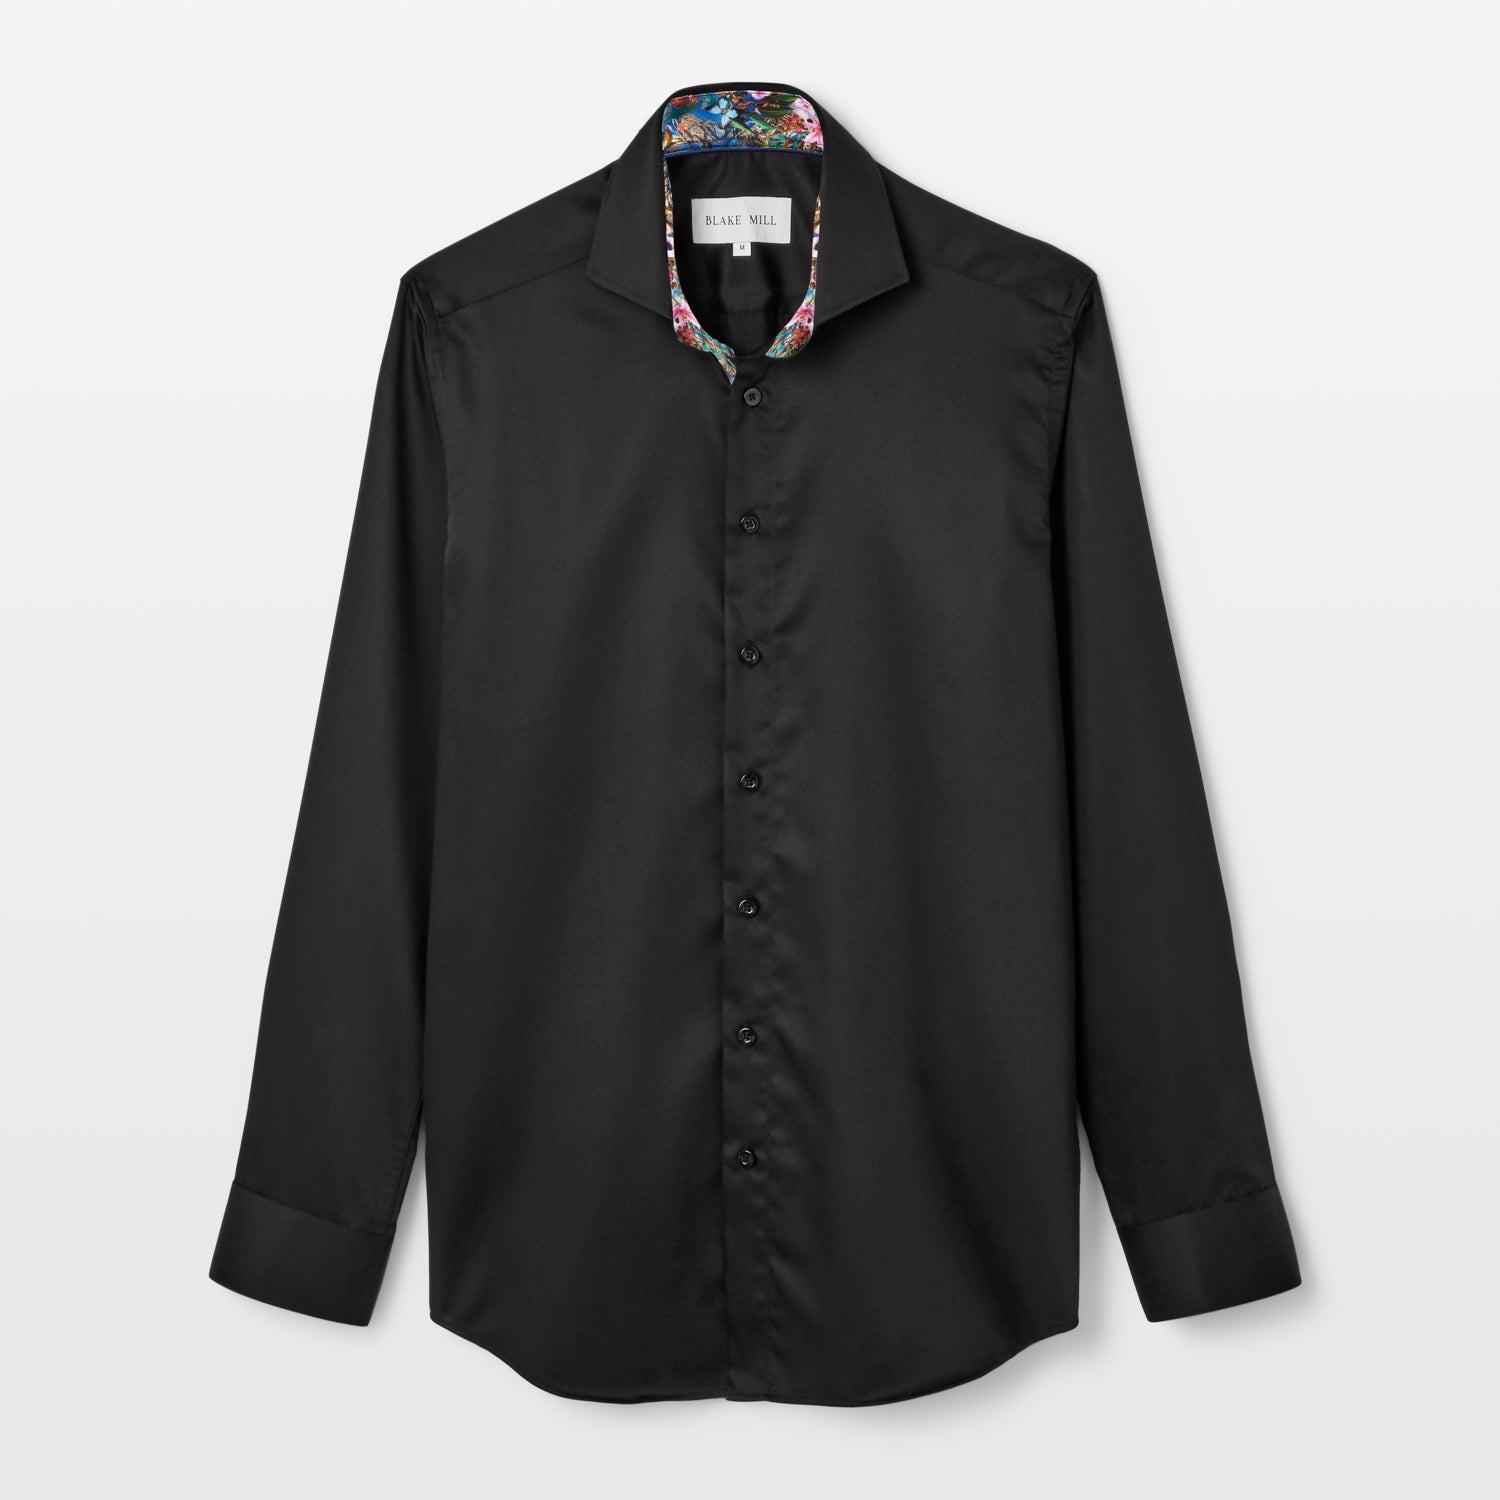 Black Sateen with Botanical Gardens Accents Shirt - Blake Mill